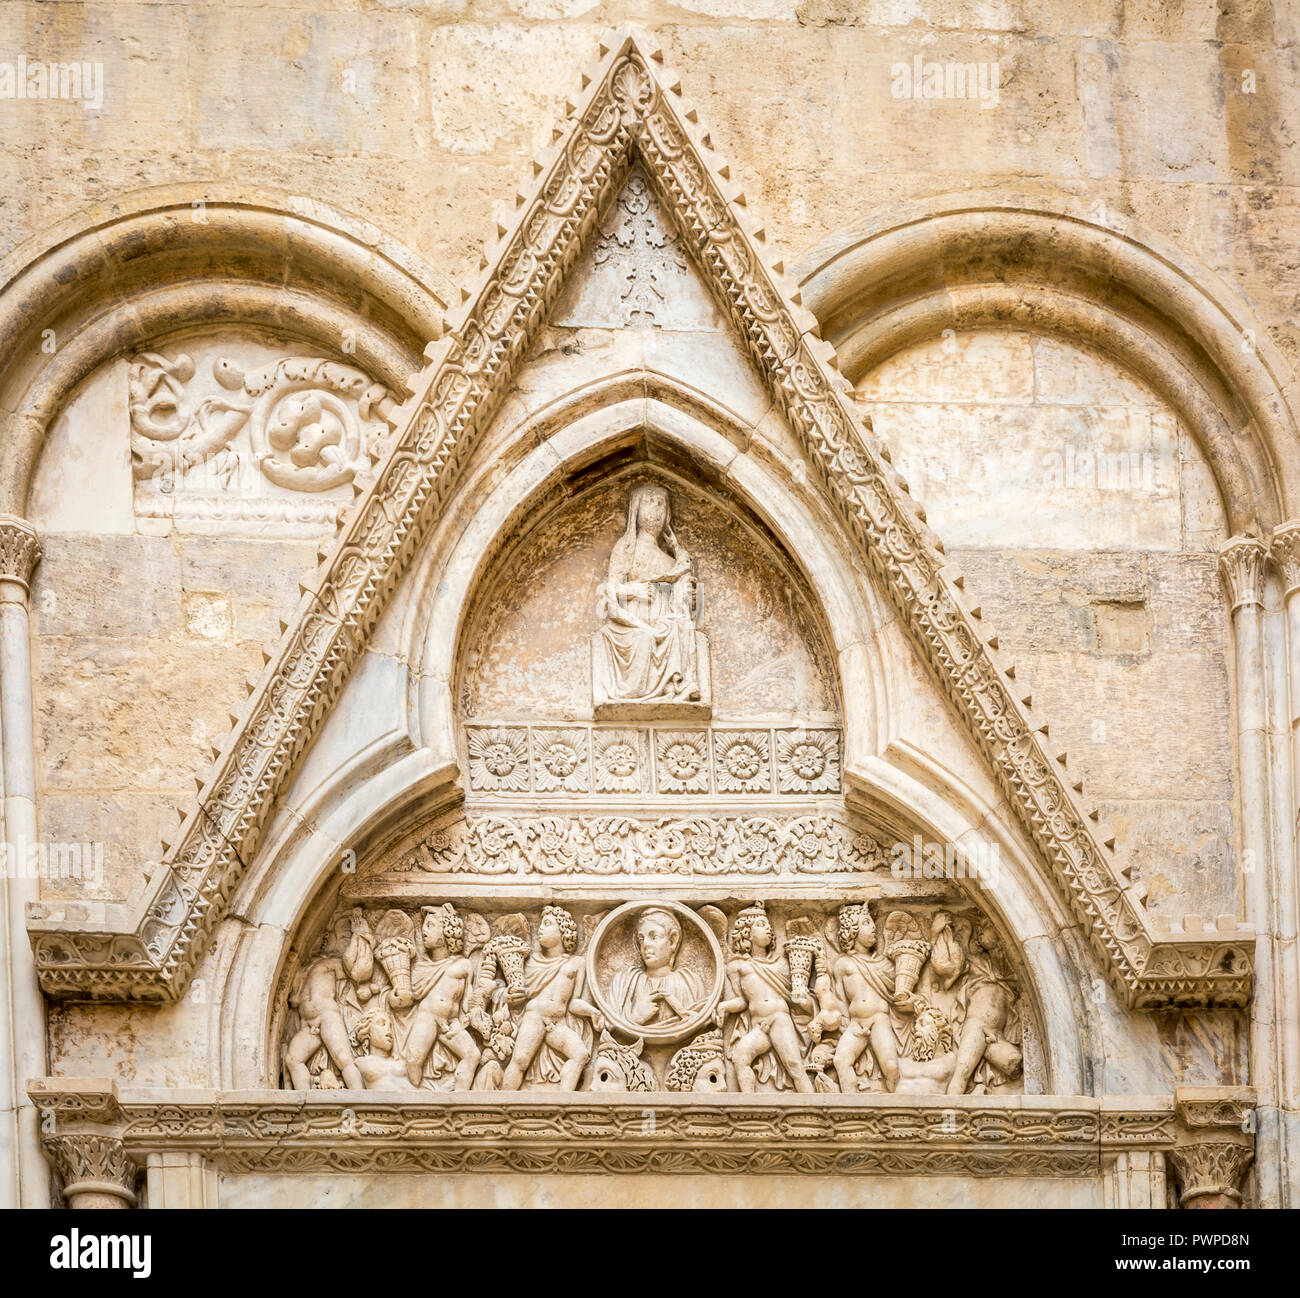 Details of the decoration over the door of the gotic transept of Cathedral of Saint Mary in Castle quarter, Cagliari, Sardinia island, italy Stock Photo